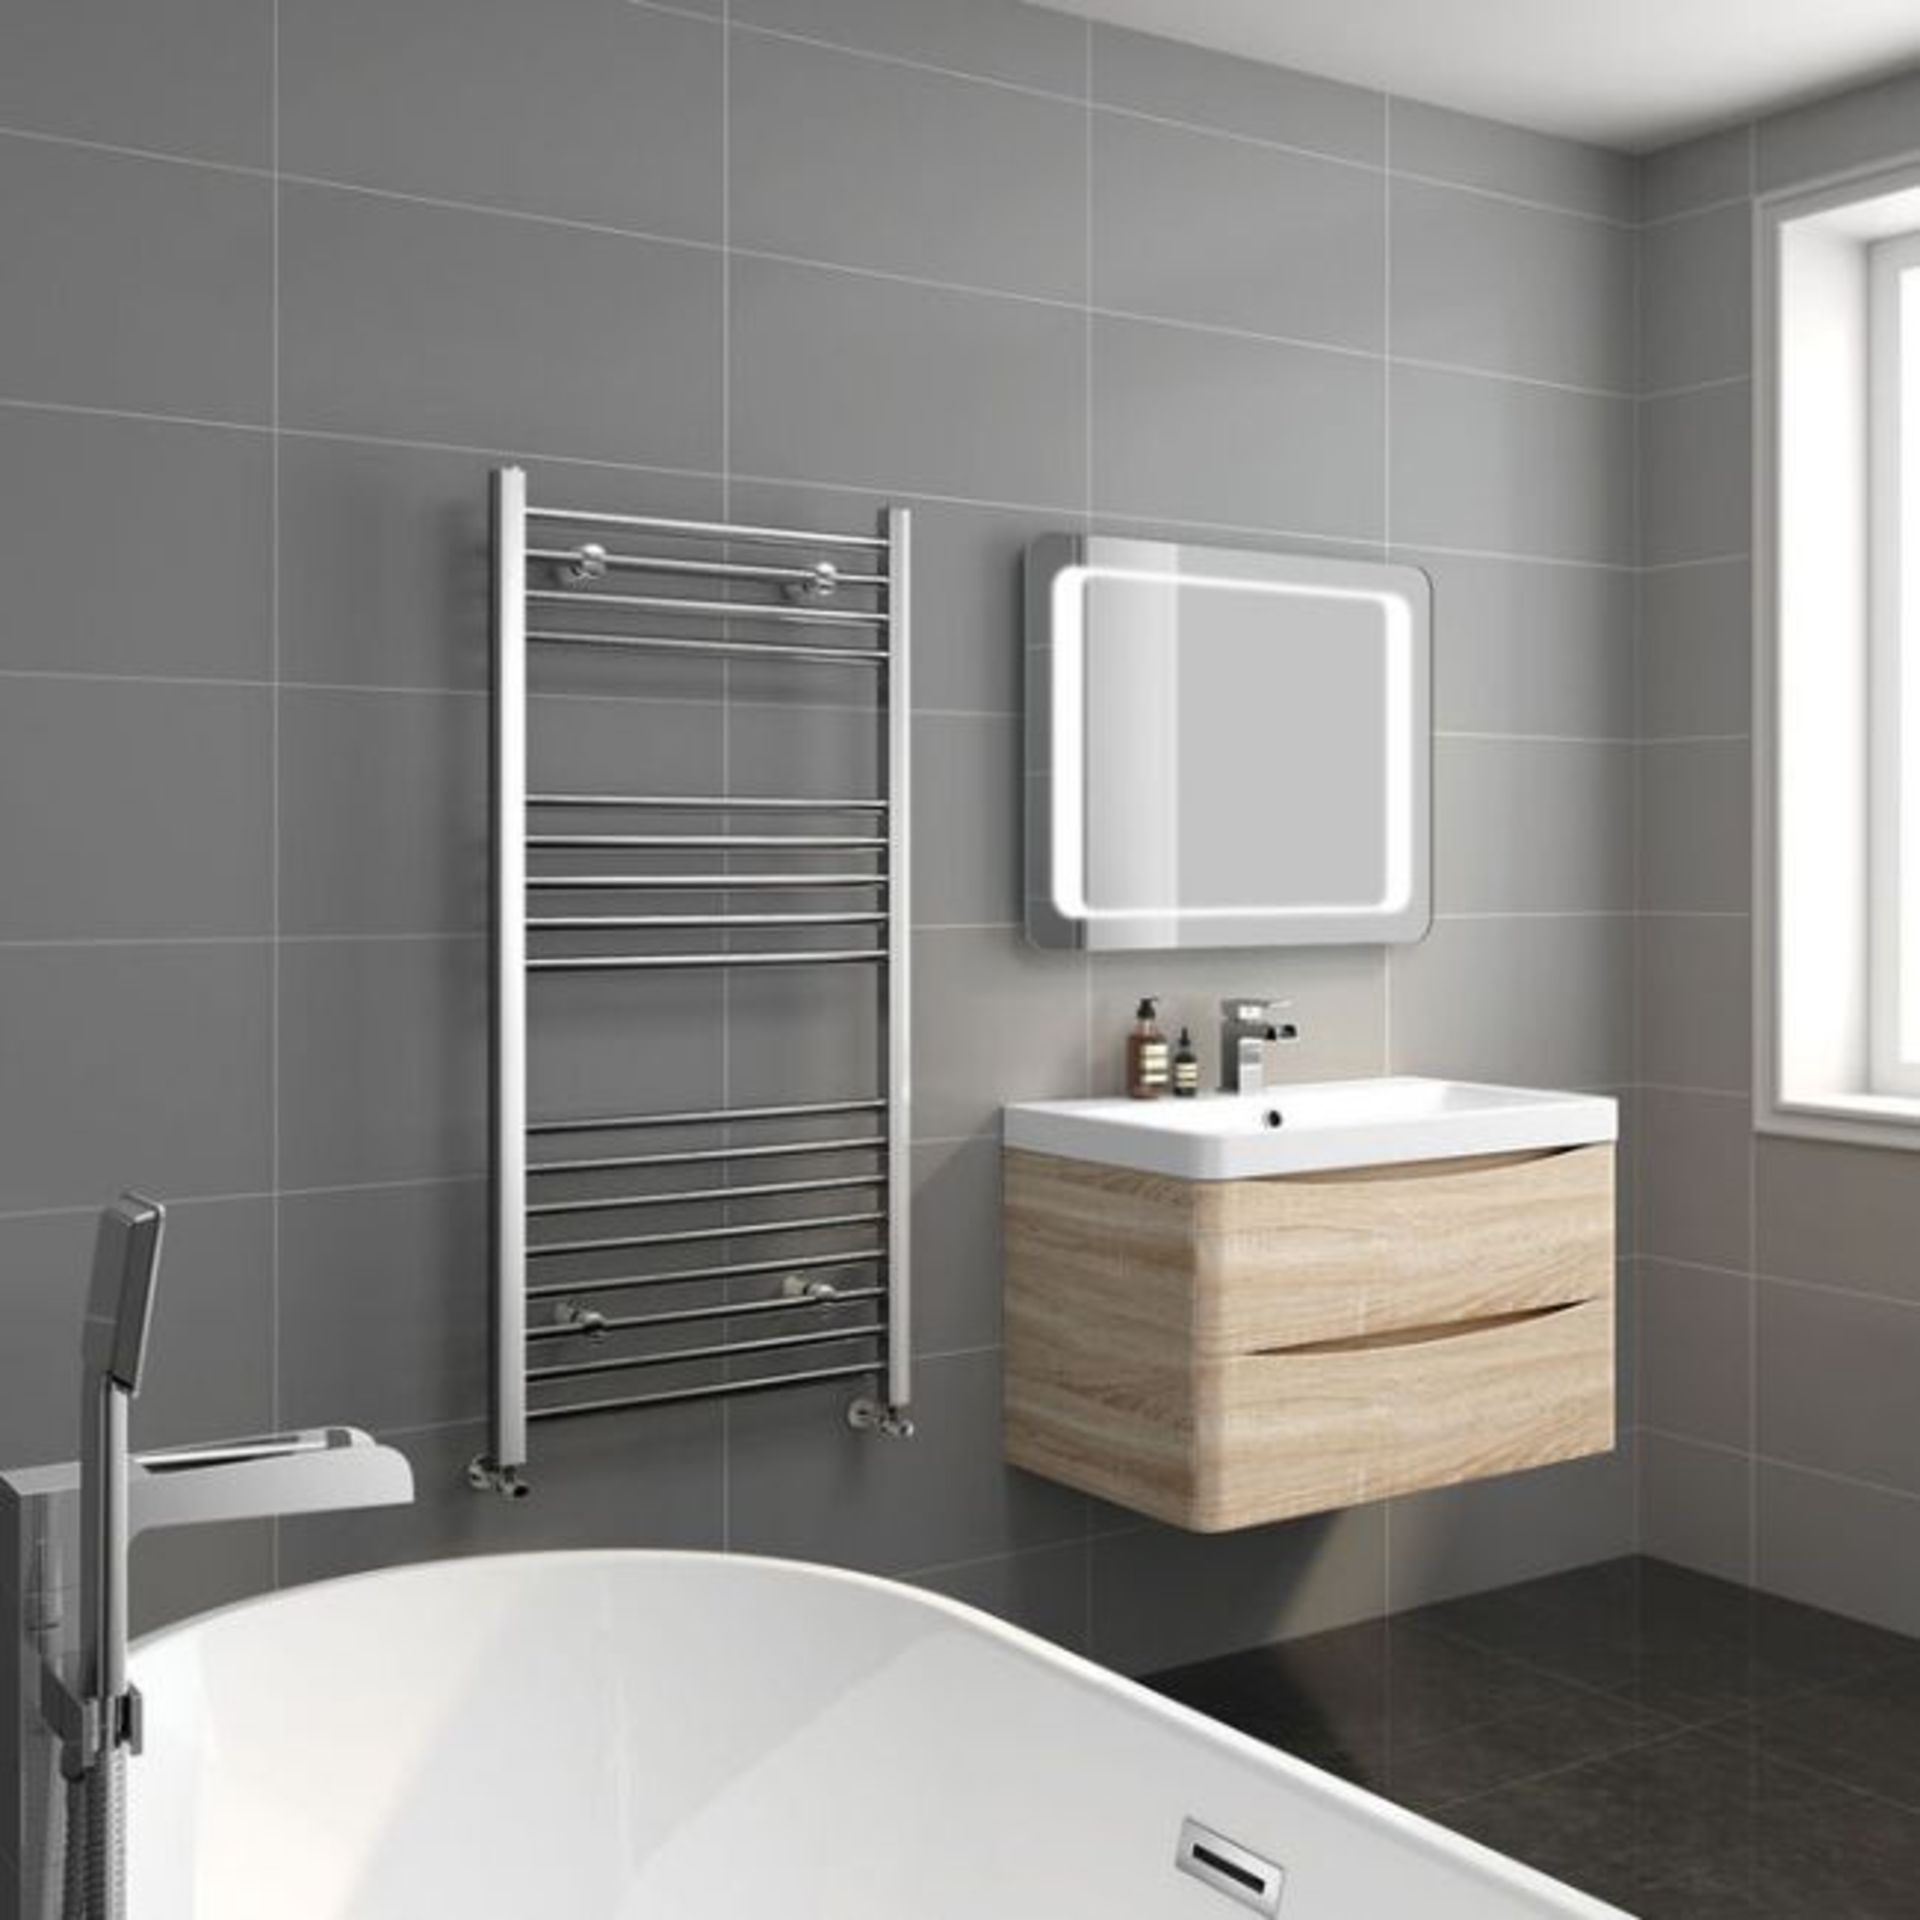 (Z50) 1200x600mm - 20mm Tubes - Chrome Heated Straight Rail Ladder Towel Radiator. We also use... - Image 2 of 2